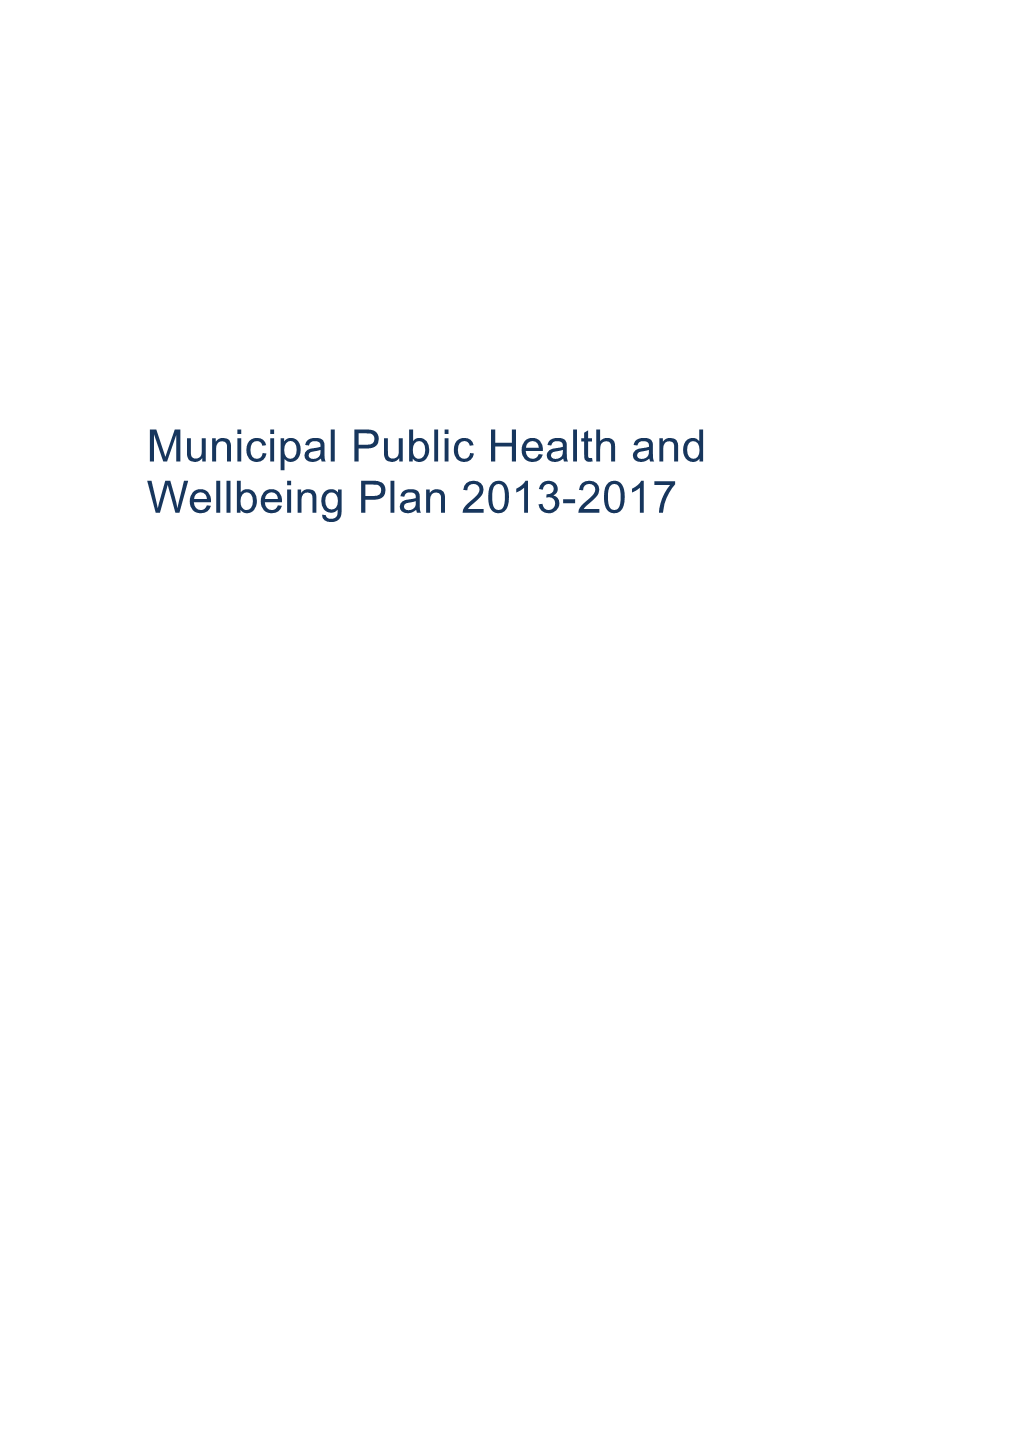 Municipal Public Health and Wellbeing Plan 2013-2017